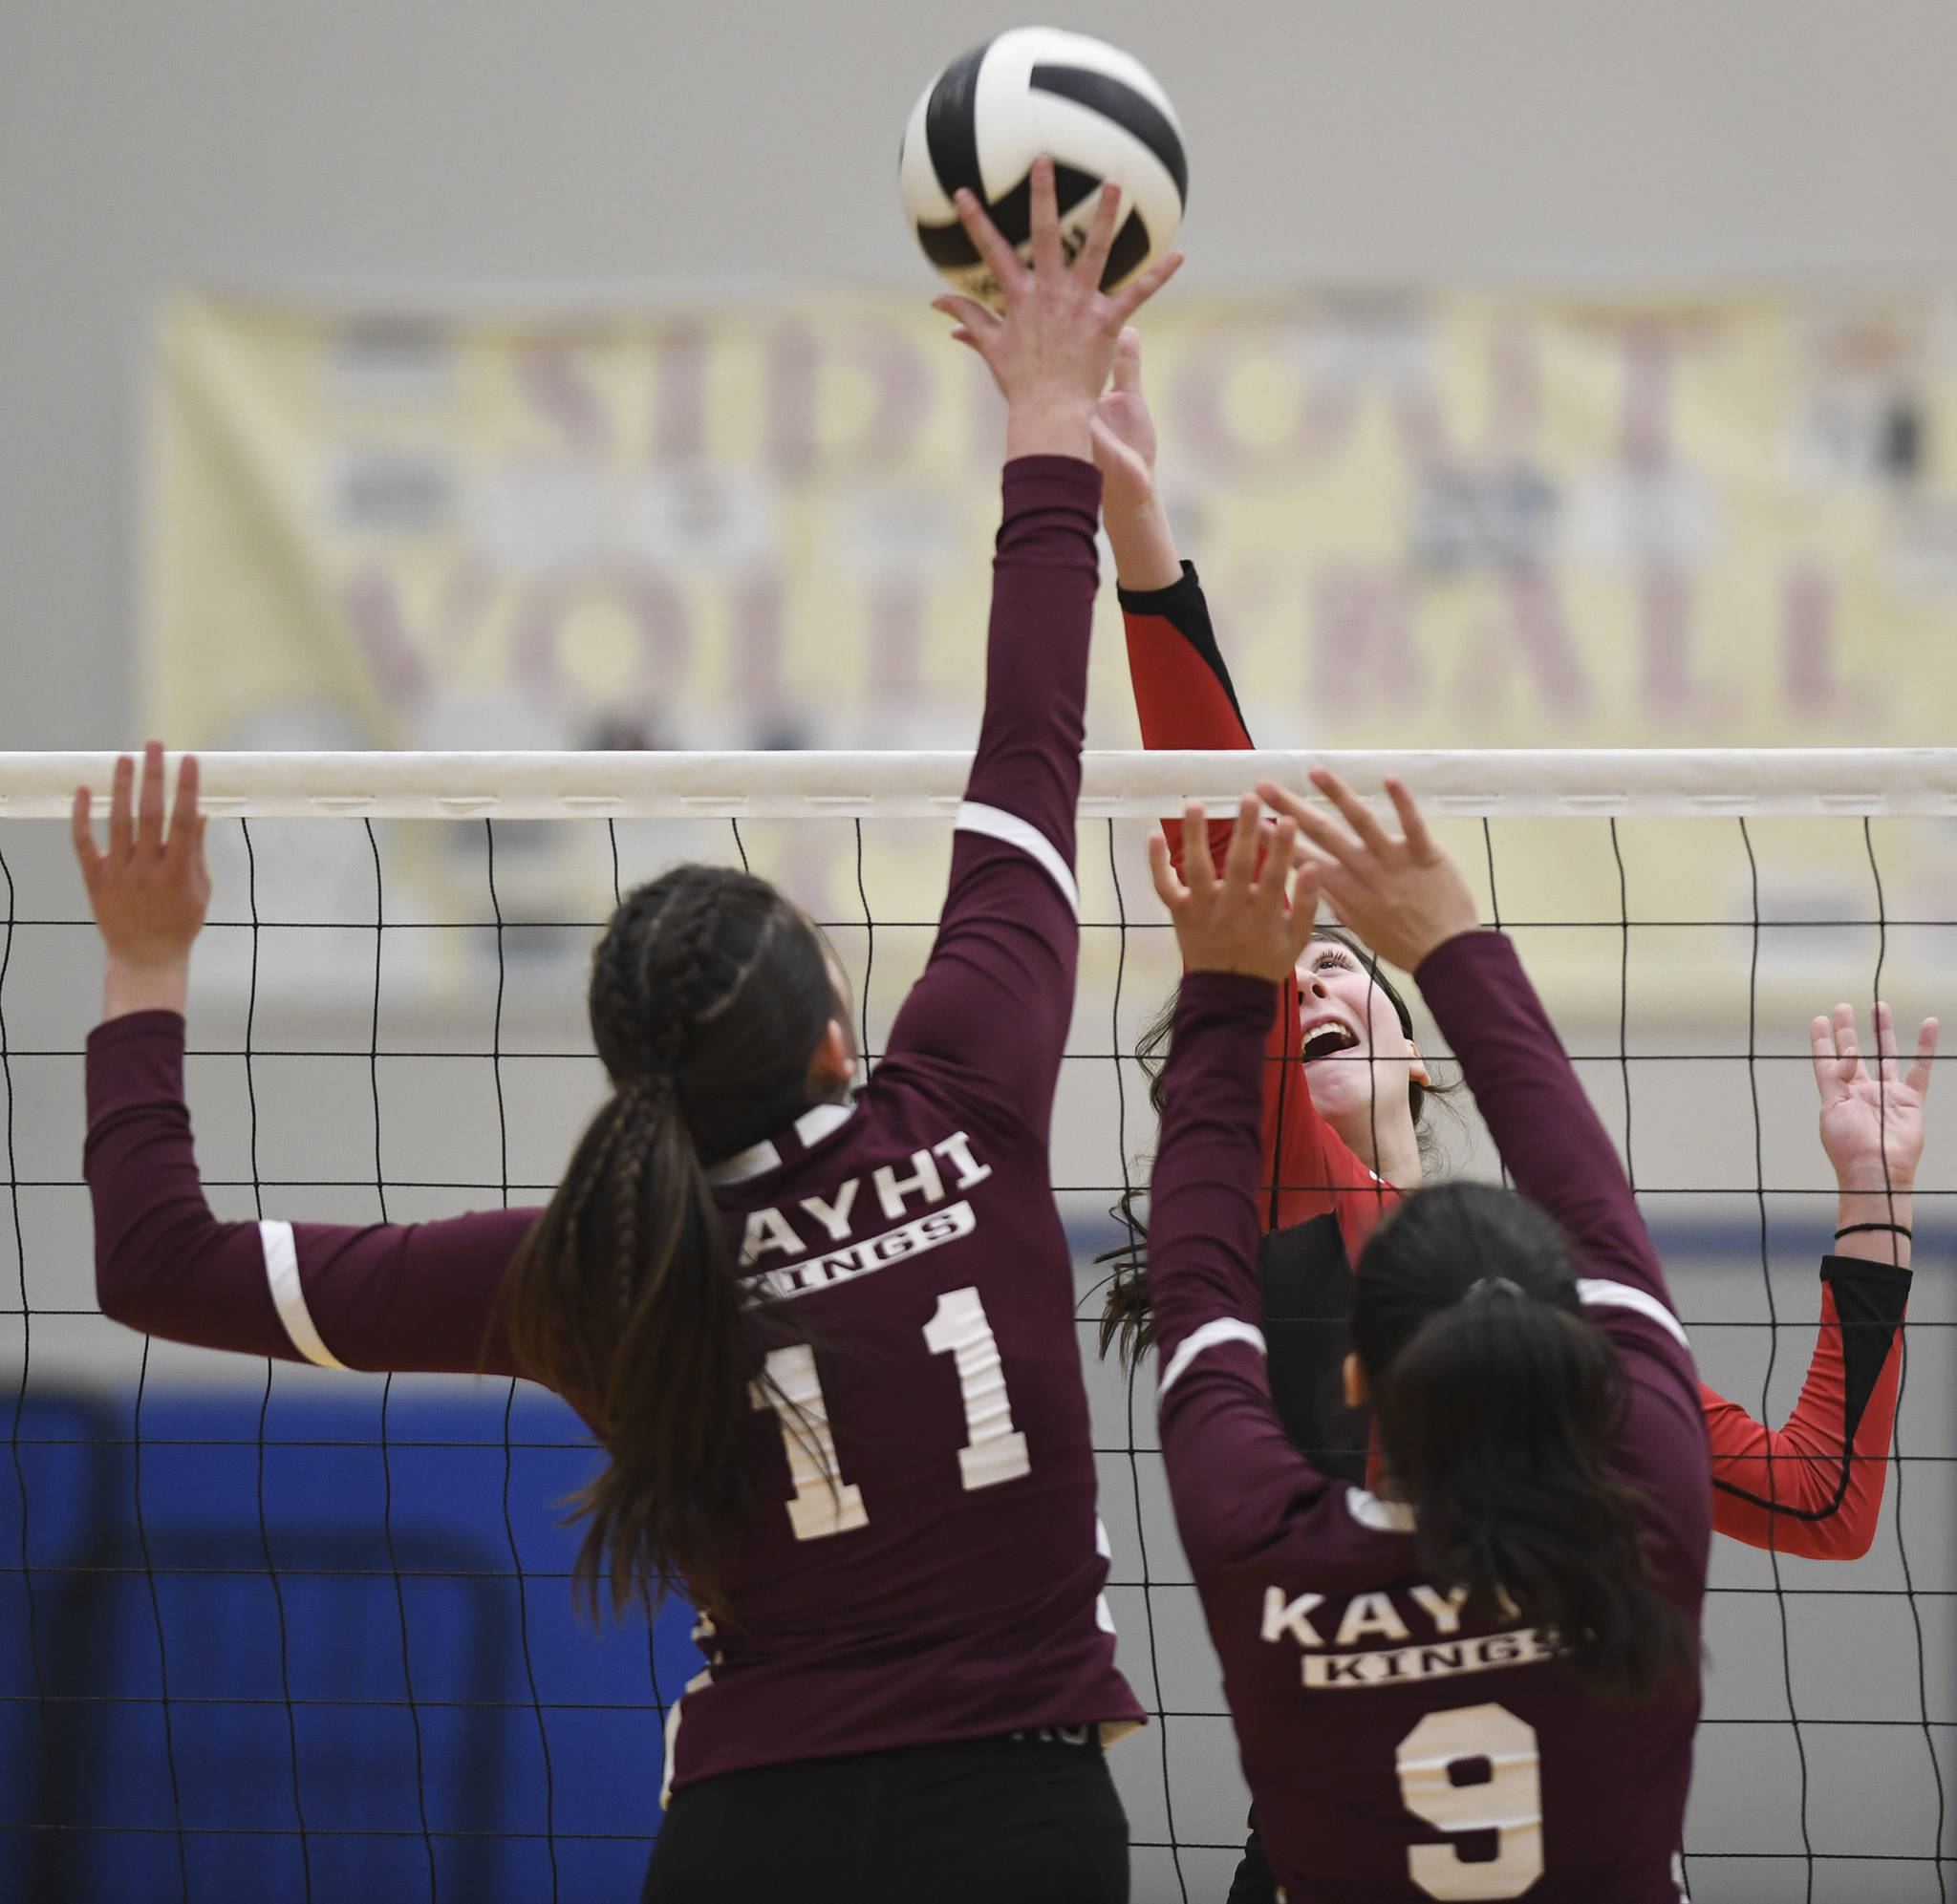 Juneau-Douglas’ Jenae Pusich tips the ball against Ketchikan’s Lindsey Byron, left, and Maddy Purcell during the Region V Volleyball Tournament at Thunder Mountain High School on Thursday, Nov. 7, 2019. JDHS won 25-8, 25-14, 14-25, 25-15. (Michael Penn | Juneau Empire)